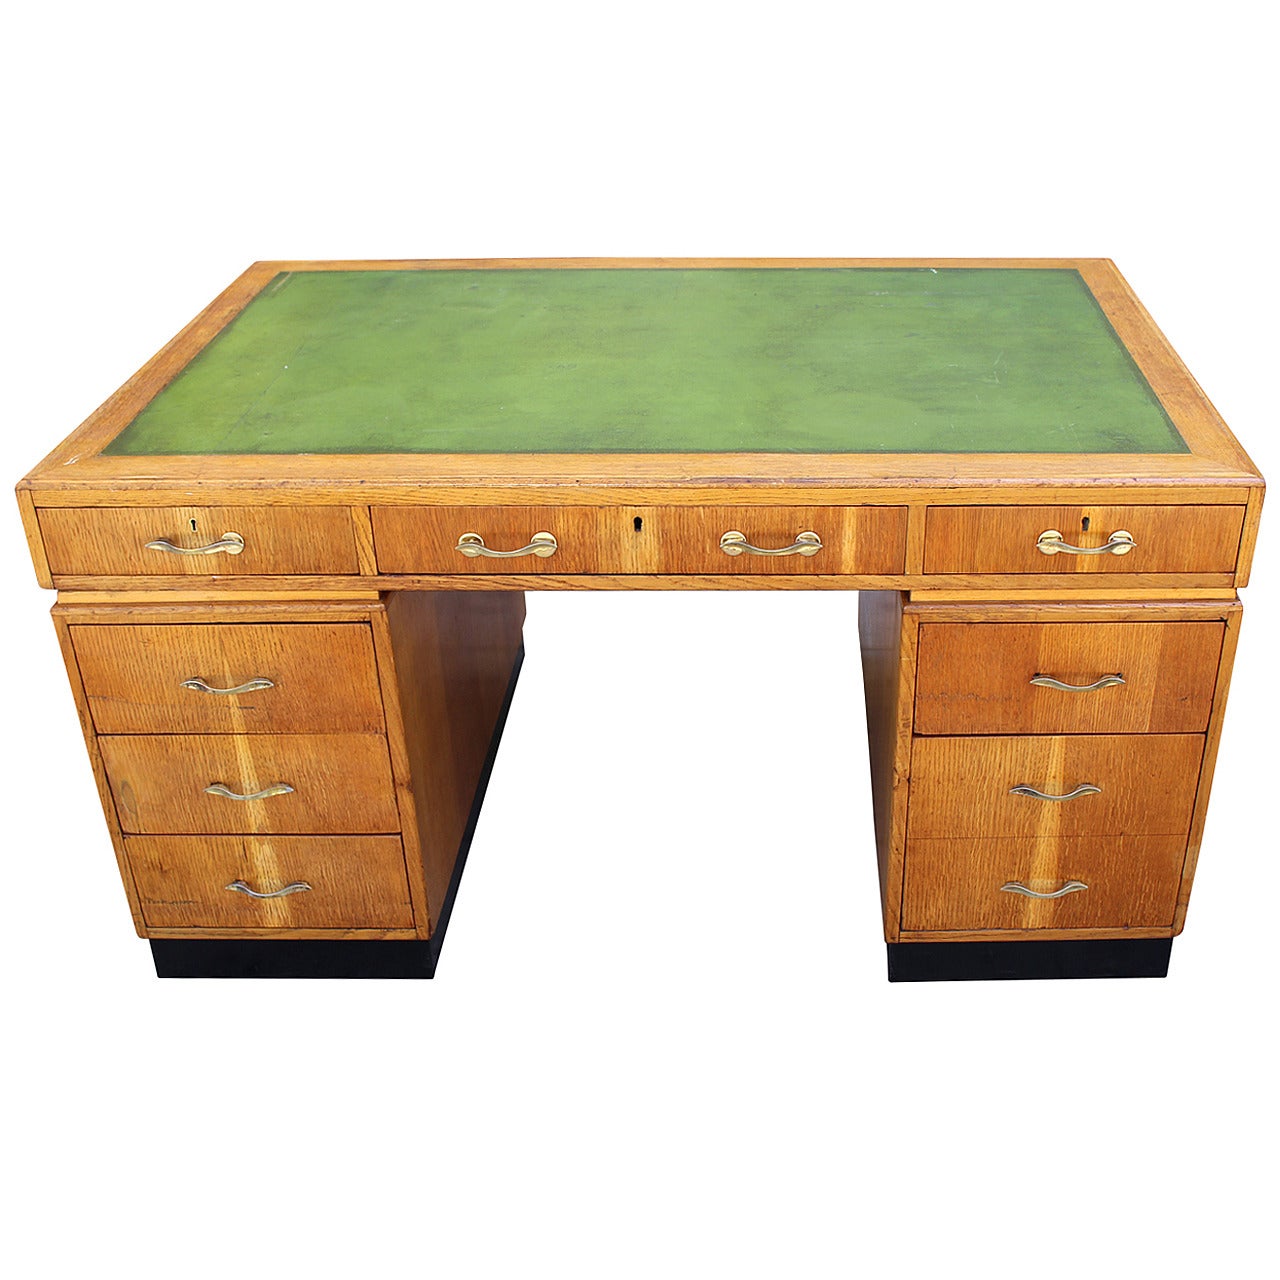 Art Deco Desk with the Leather Top